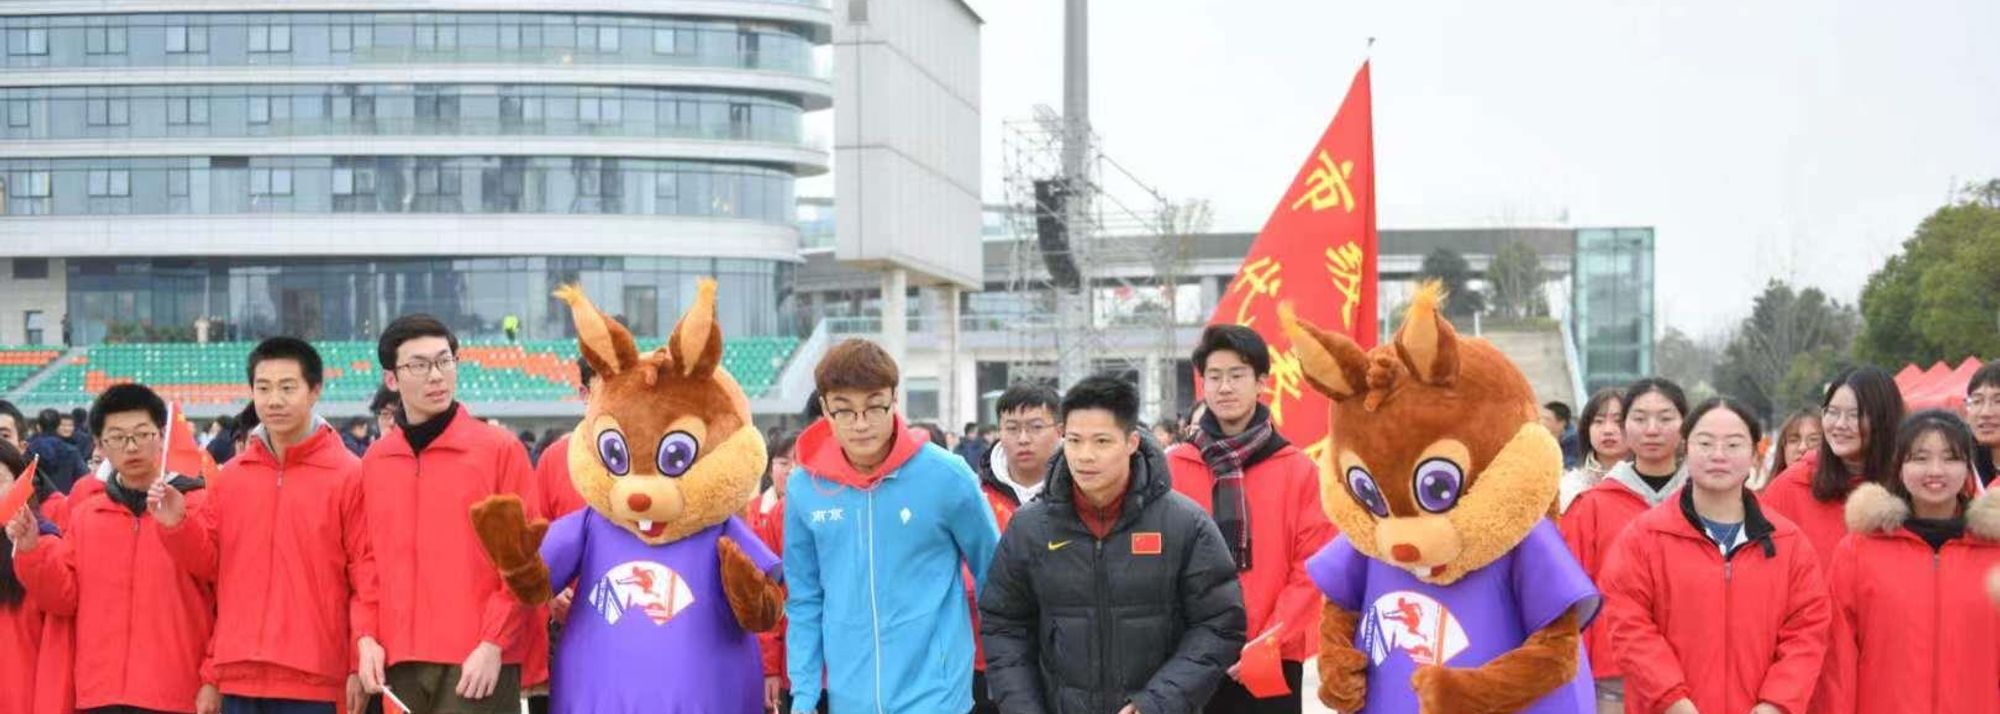 Chinese sprint star Su Bingtian led more than 4000 runners at the 38th edition of the annual New Year Run in Nanjing, the host city of the next World Athletics Indoor Championships.